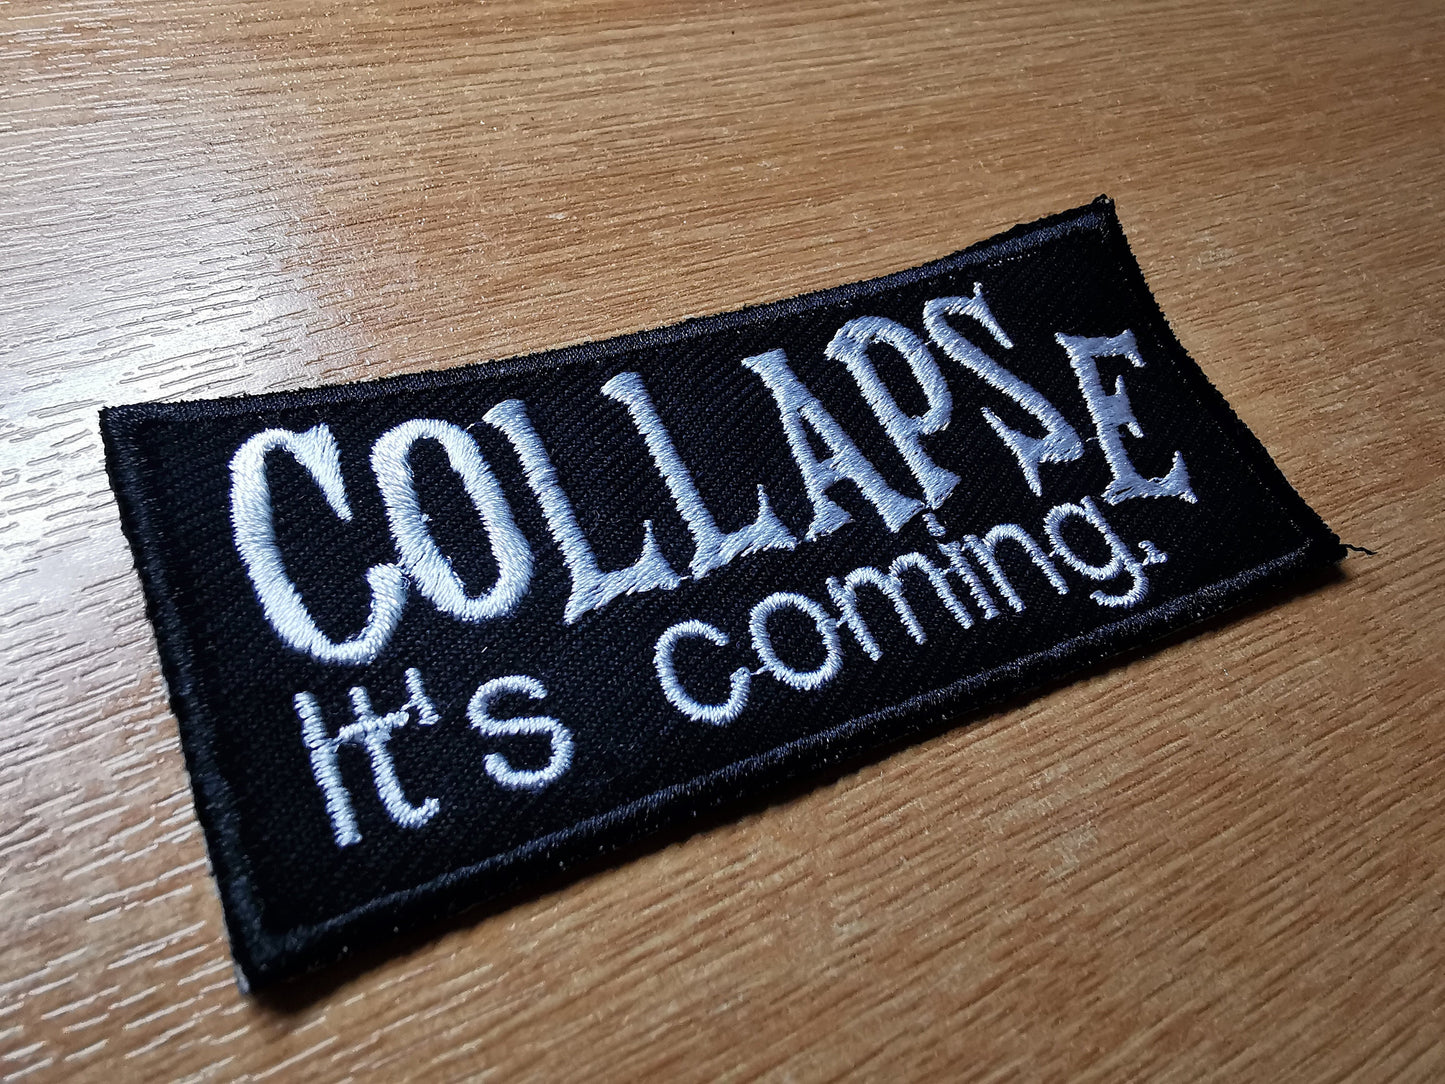 Collapse Embroidered Patch Nihilistic Iron on Patches For the Coming Apocalypse